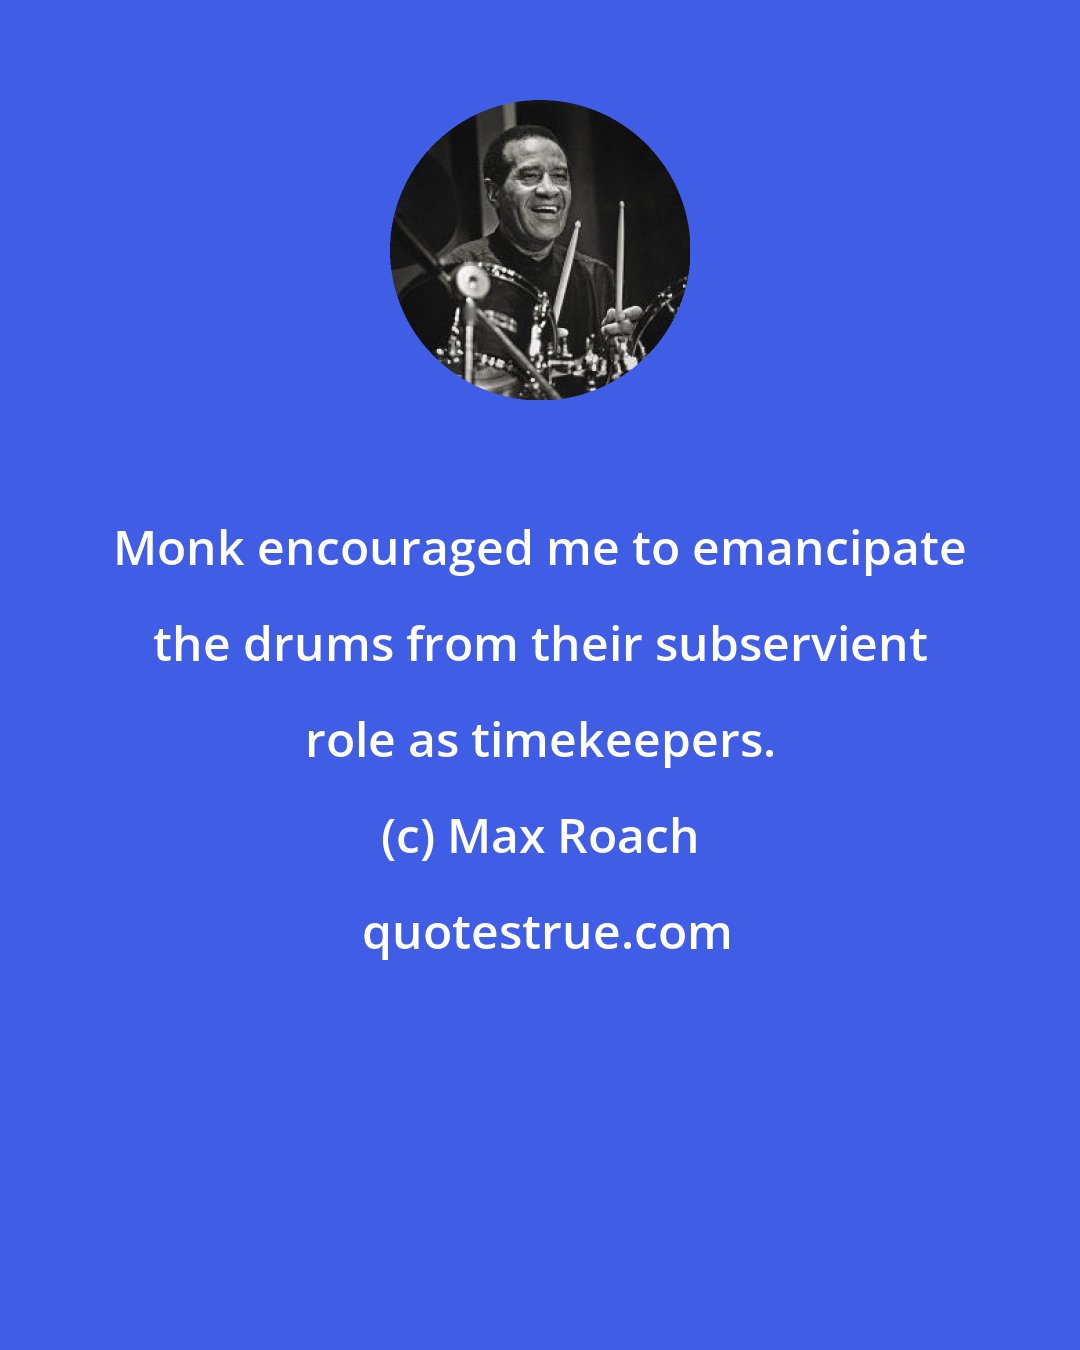 Max Roach: Monk encouraged me to emancipate the drums from their subservient role as timekeepers.